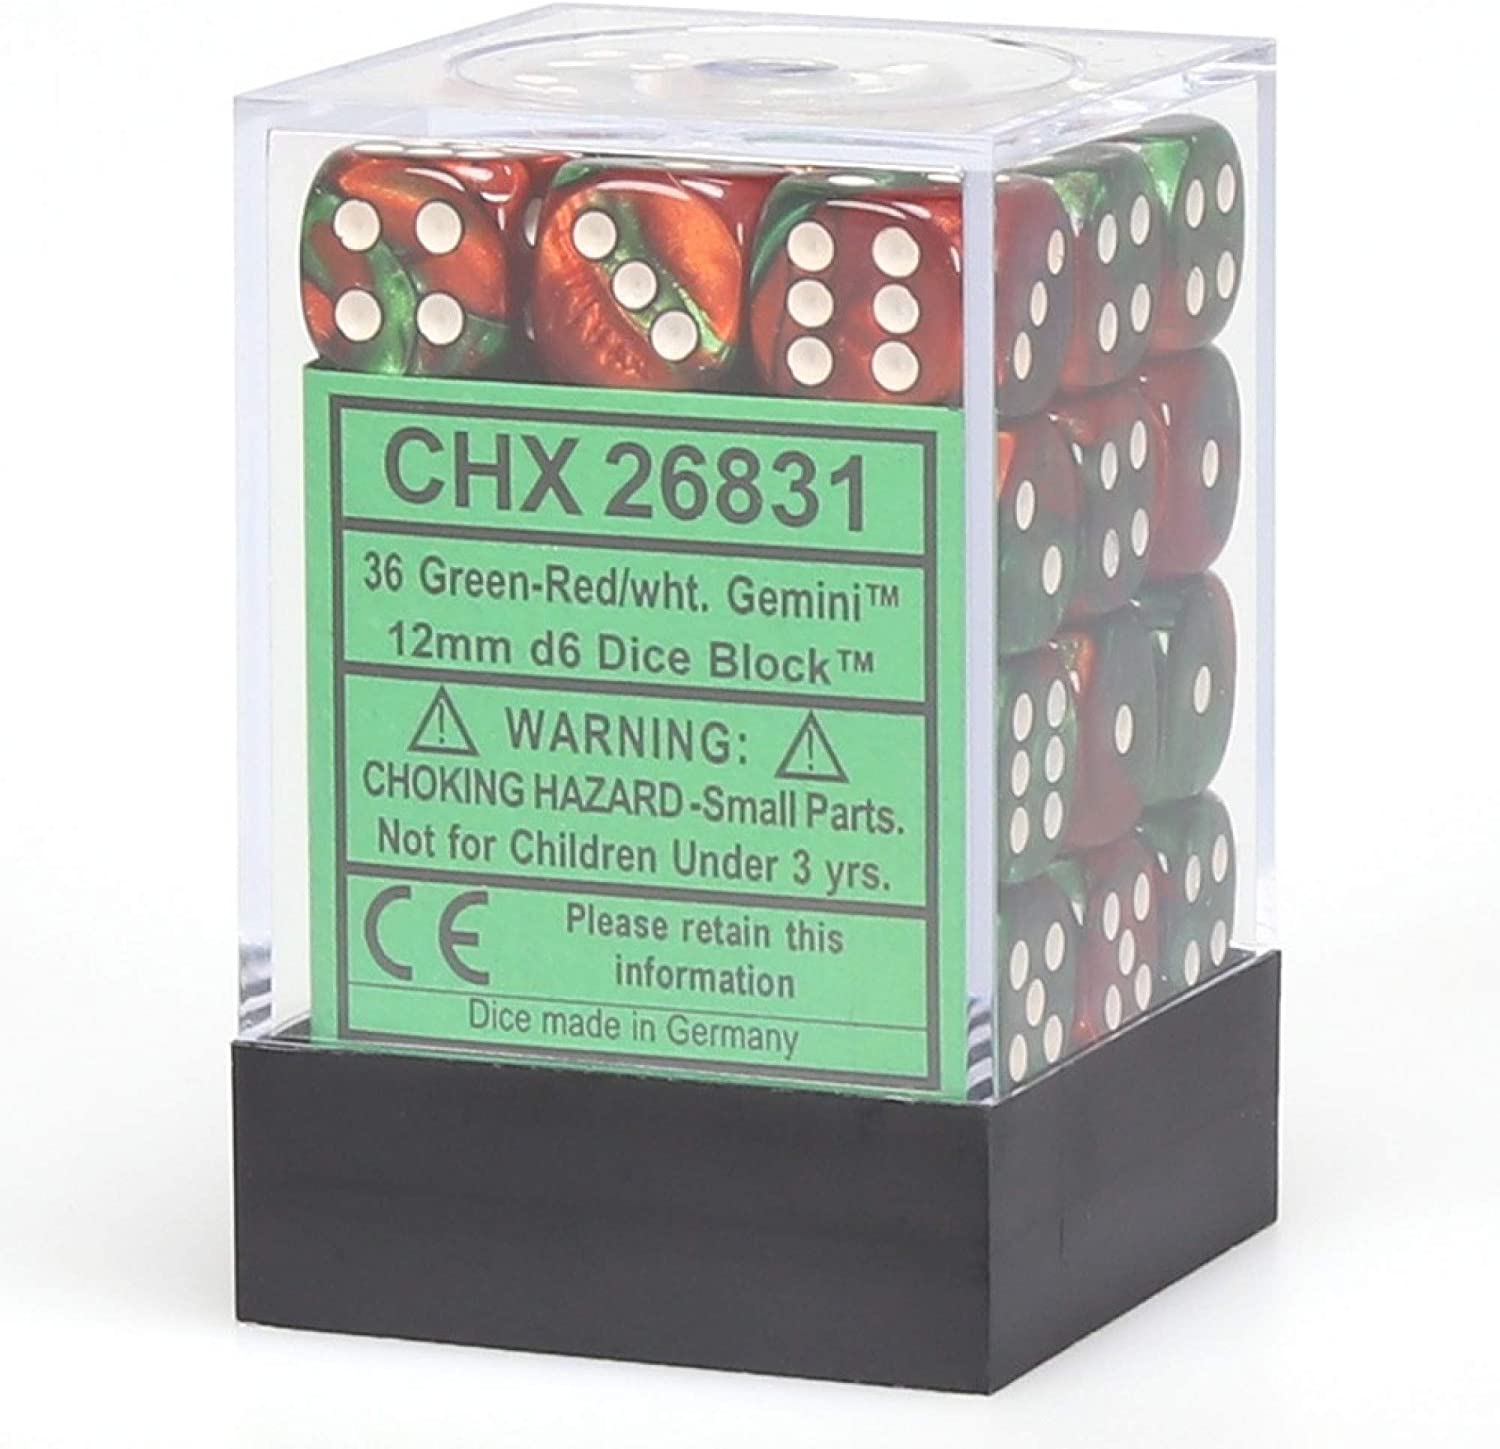 Chessex Dice: D6 Block 12mm - Gemini - Green-Red with White (CHX 26831) - Gamescape